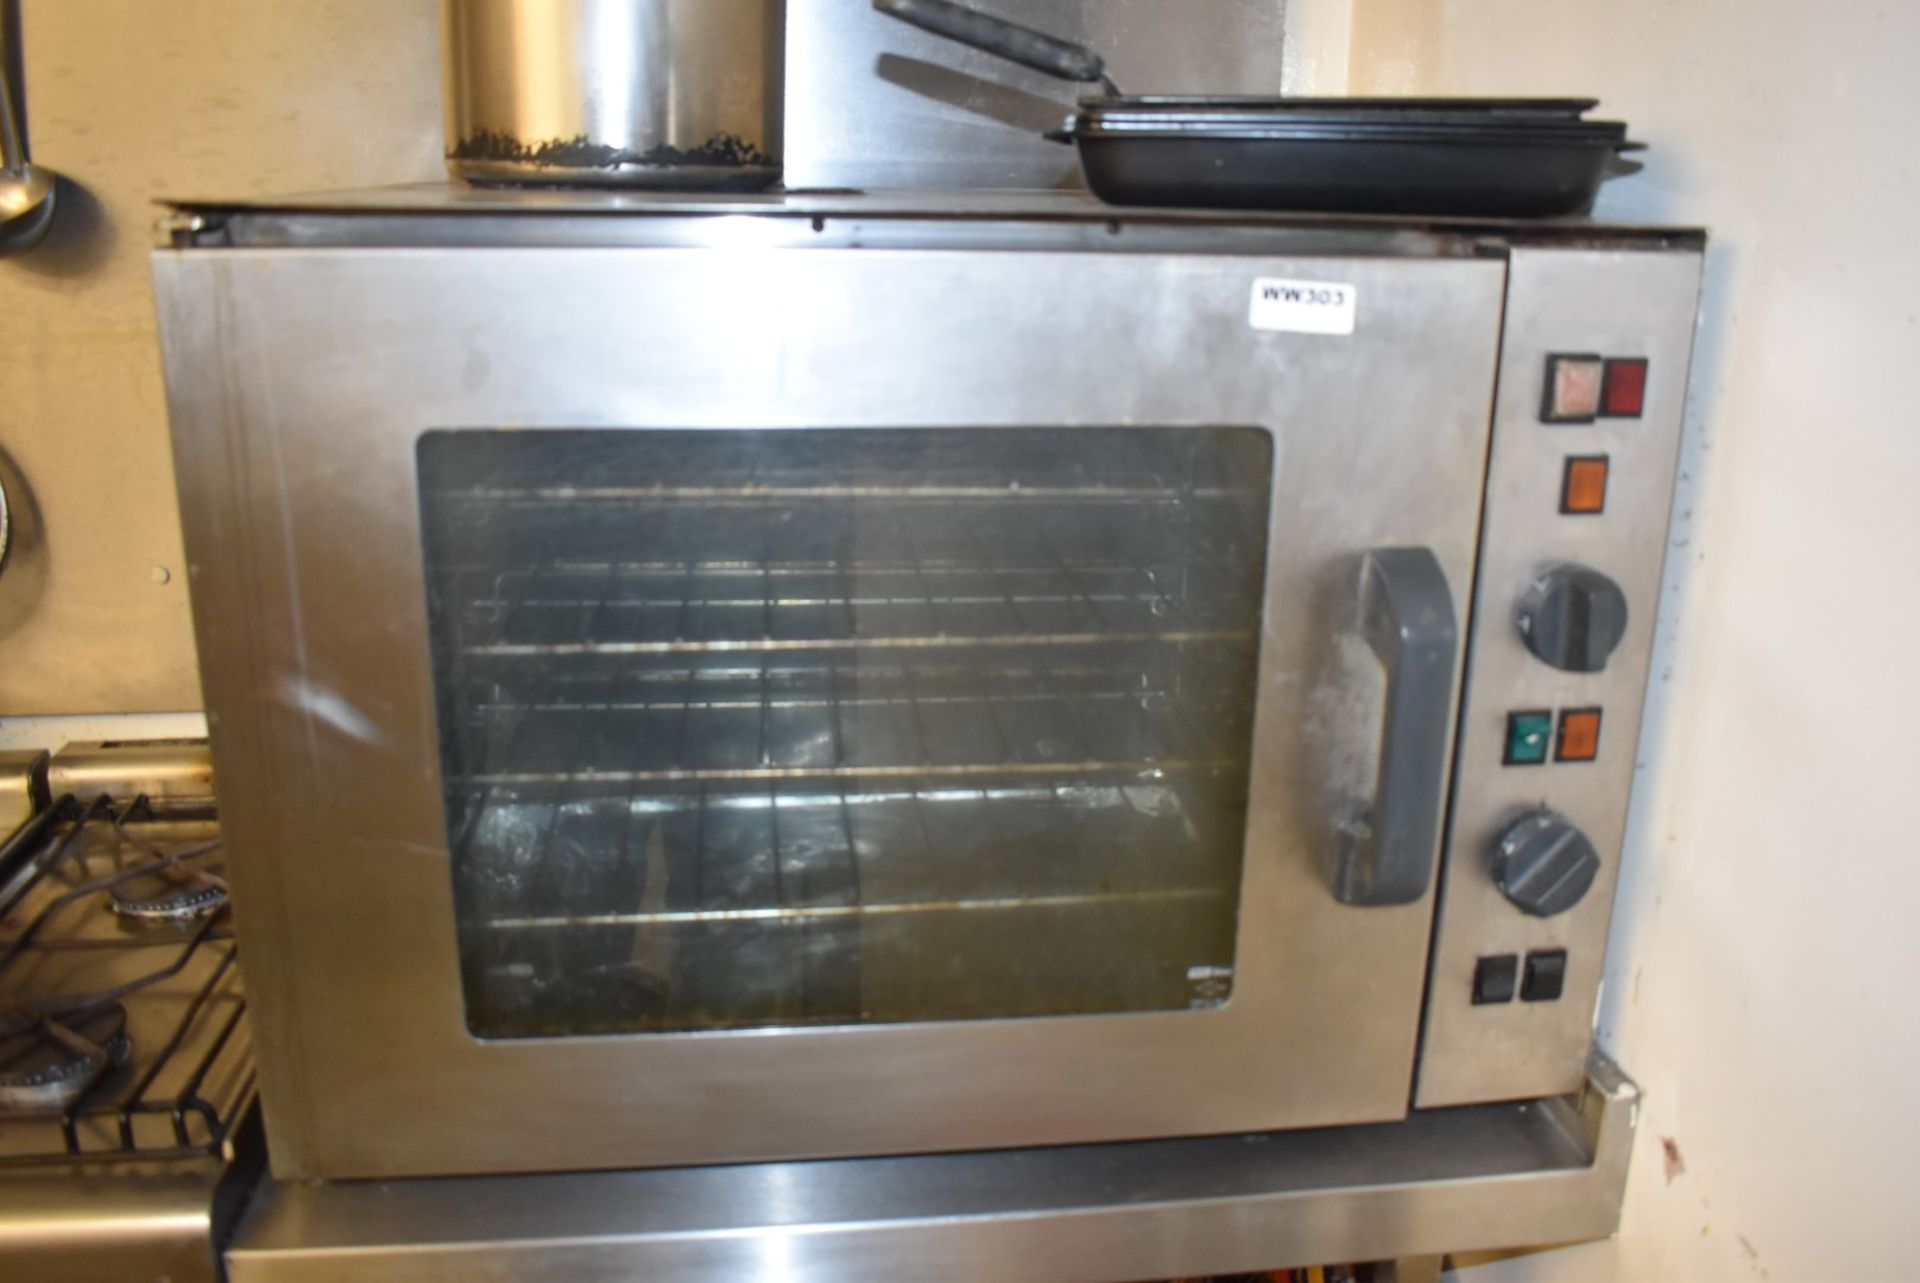 1 x Stainless Steel Commercial Four Grid Gas Oven - H144 x W76 x D62 cms - Ref WW303 - CL520 - - Image 2 of 4